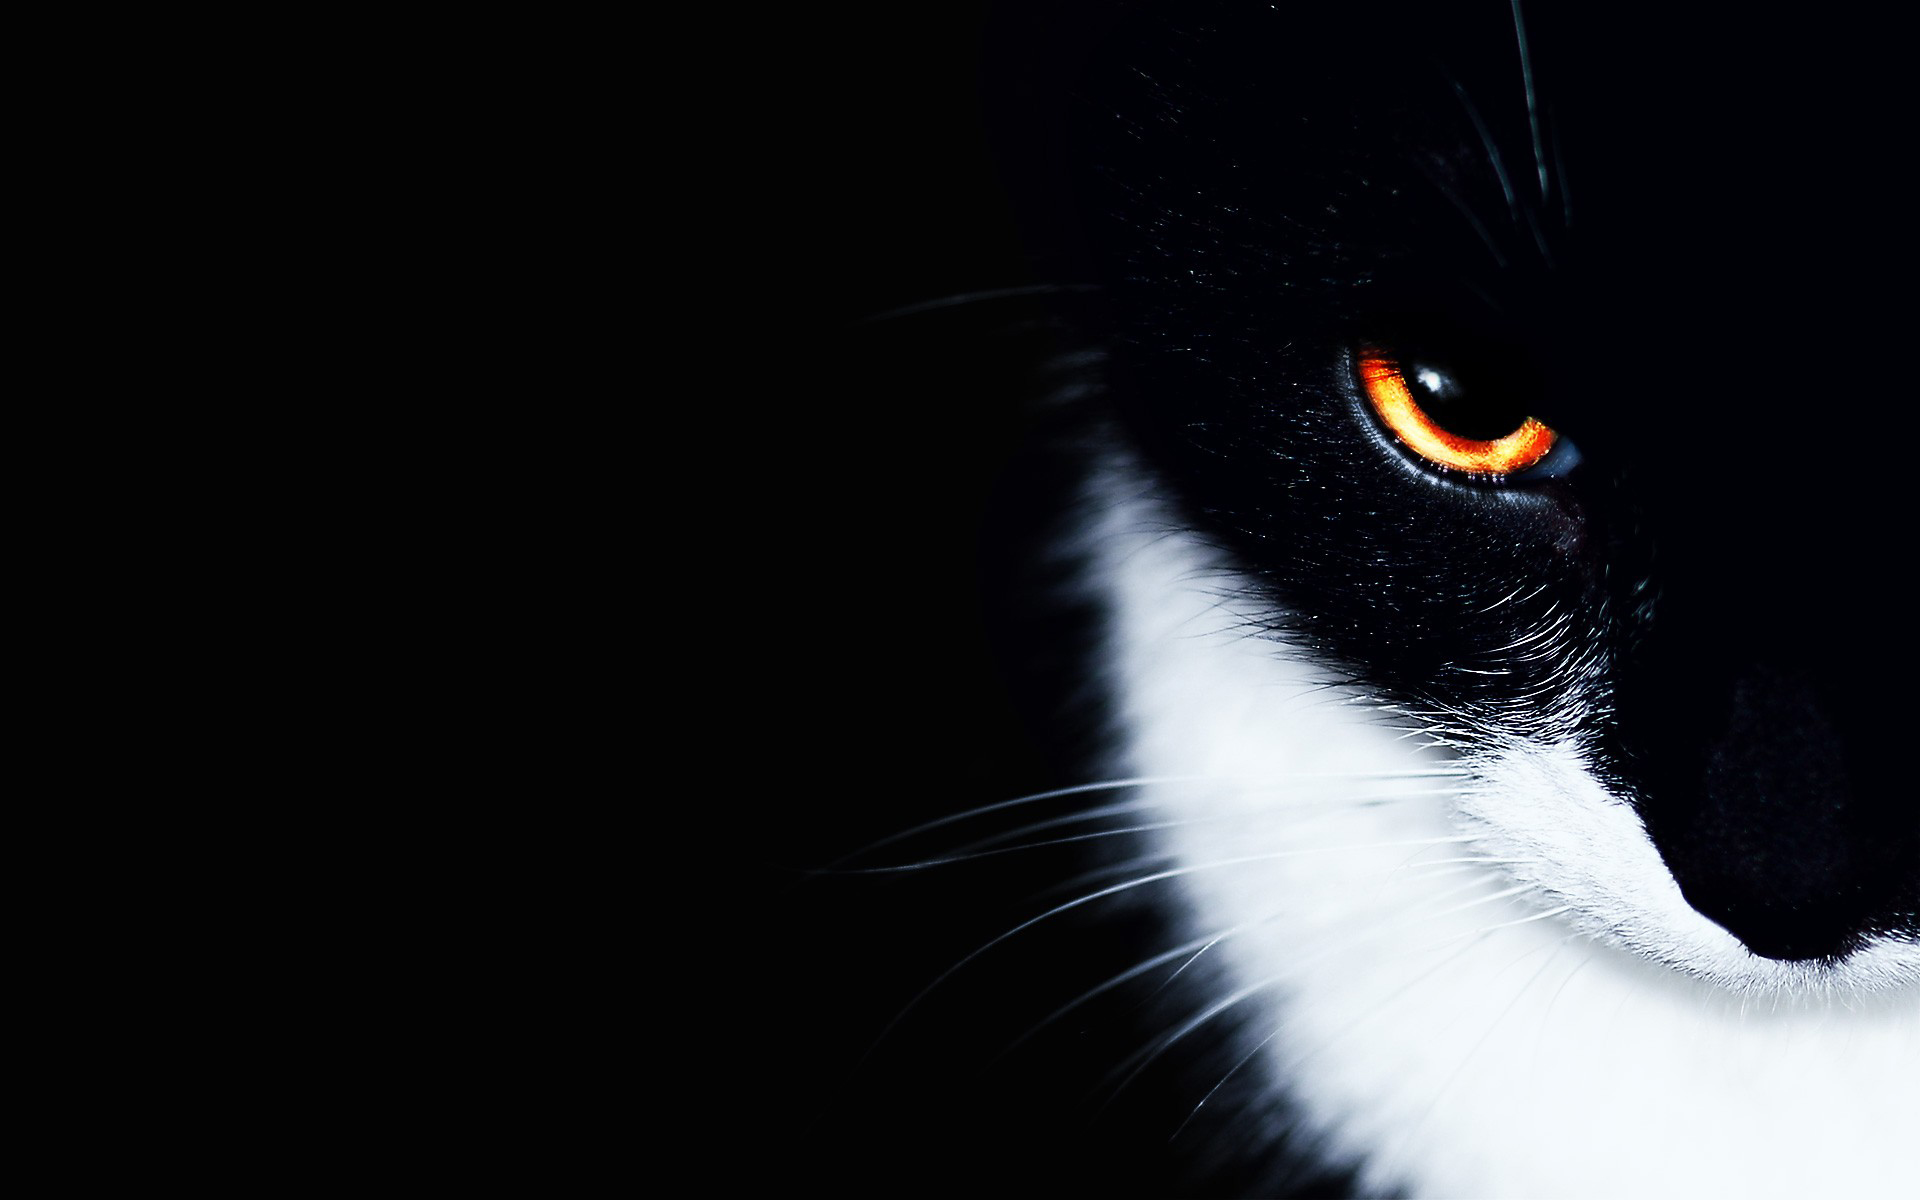 Black And White Cat With Amber Eyes - HD Wallpaper 